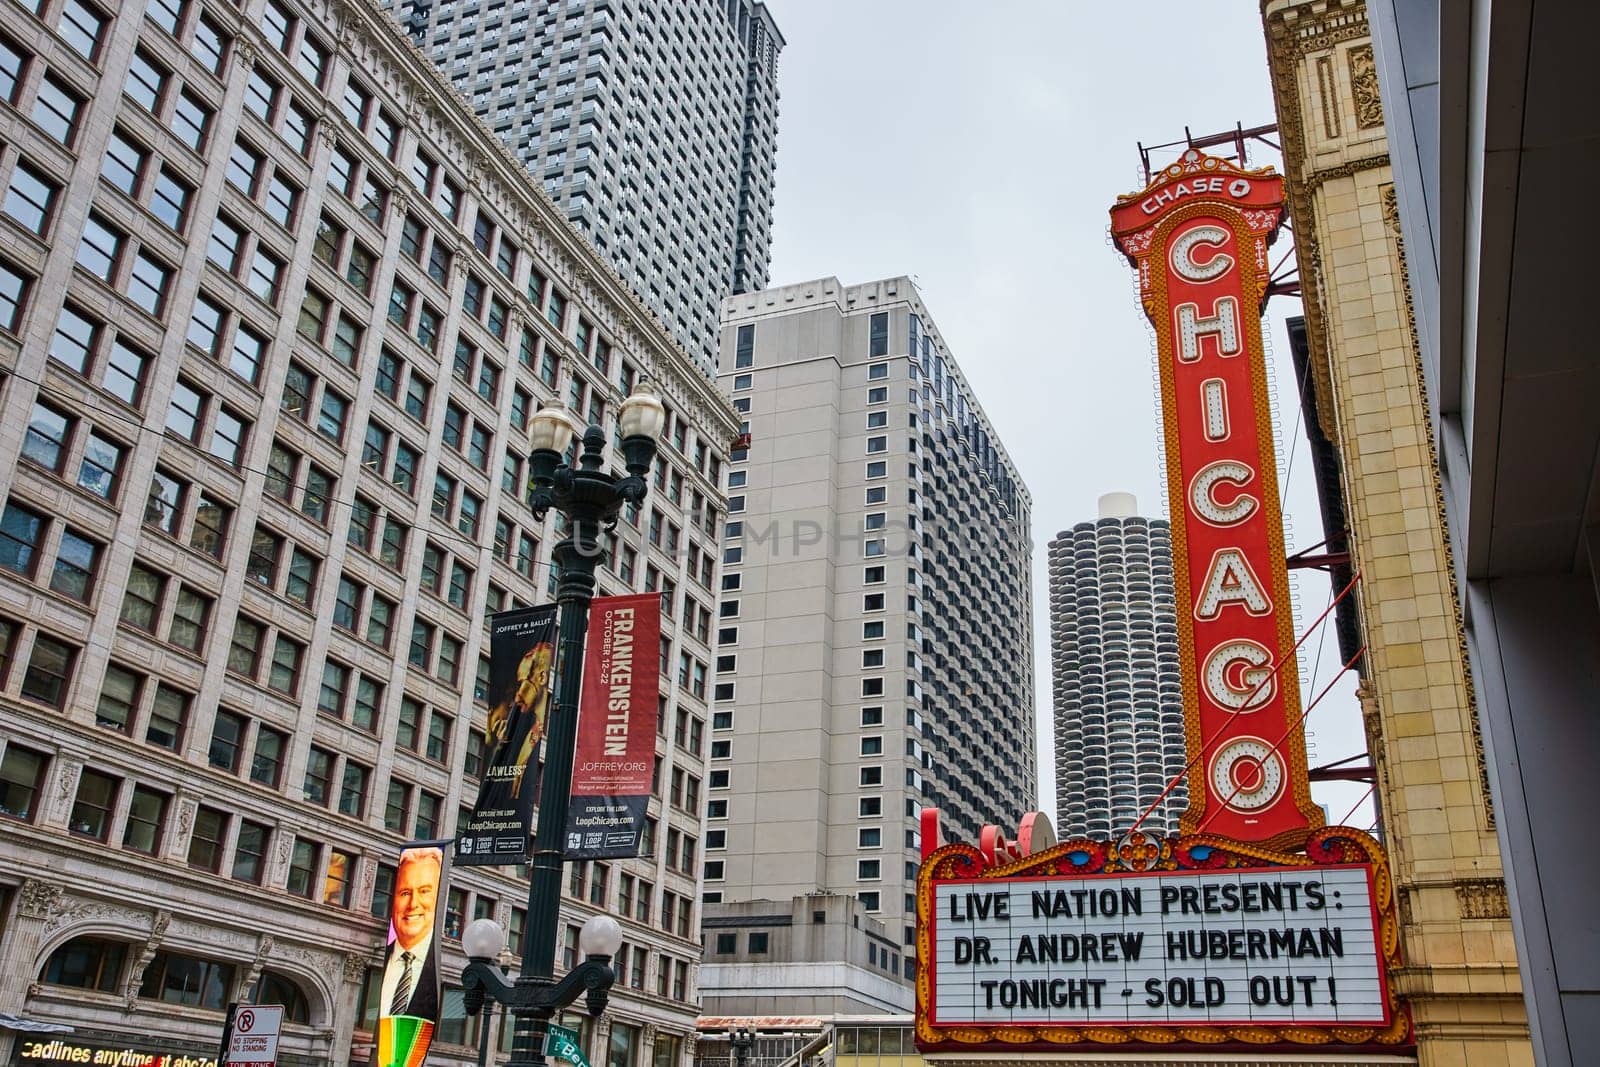 Large orange sign with Chicago in white lettering above a theatre sign in city with skyscrapers by njproductions